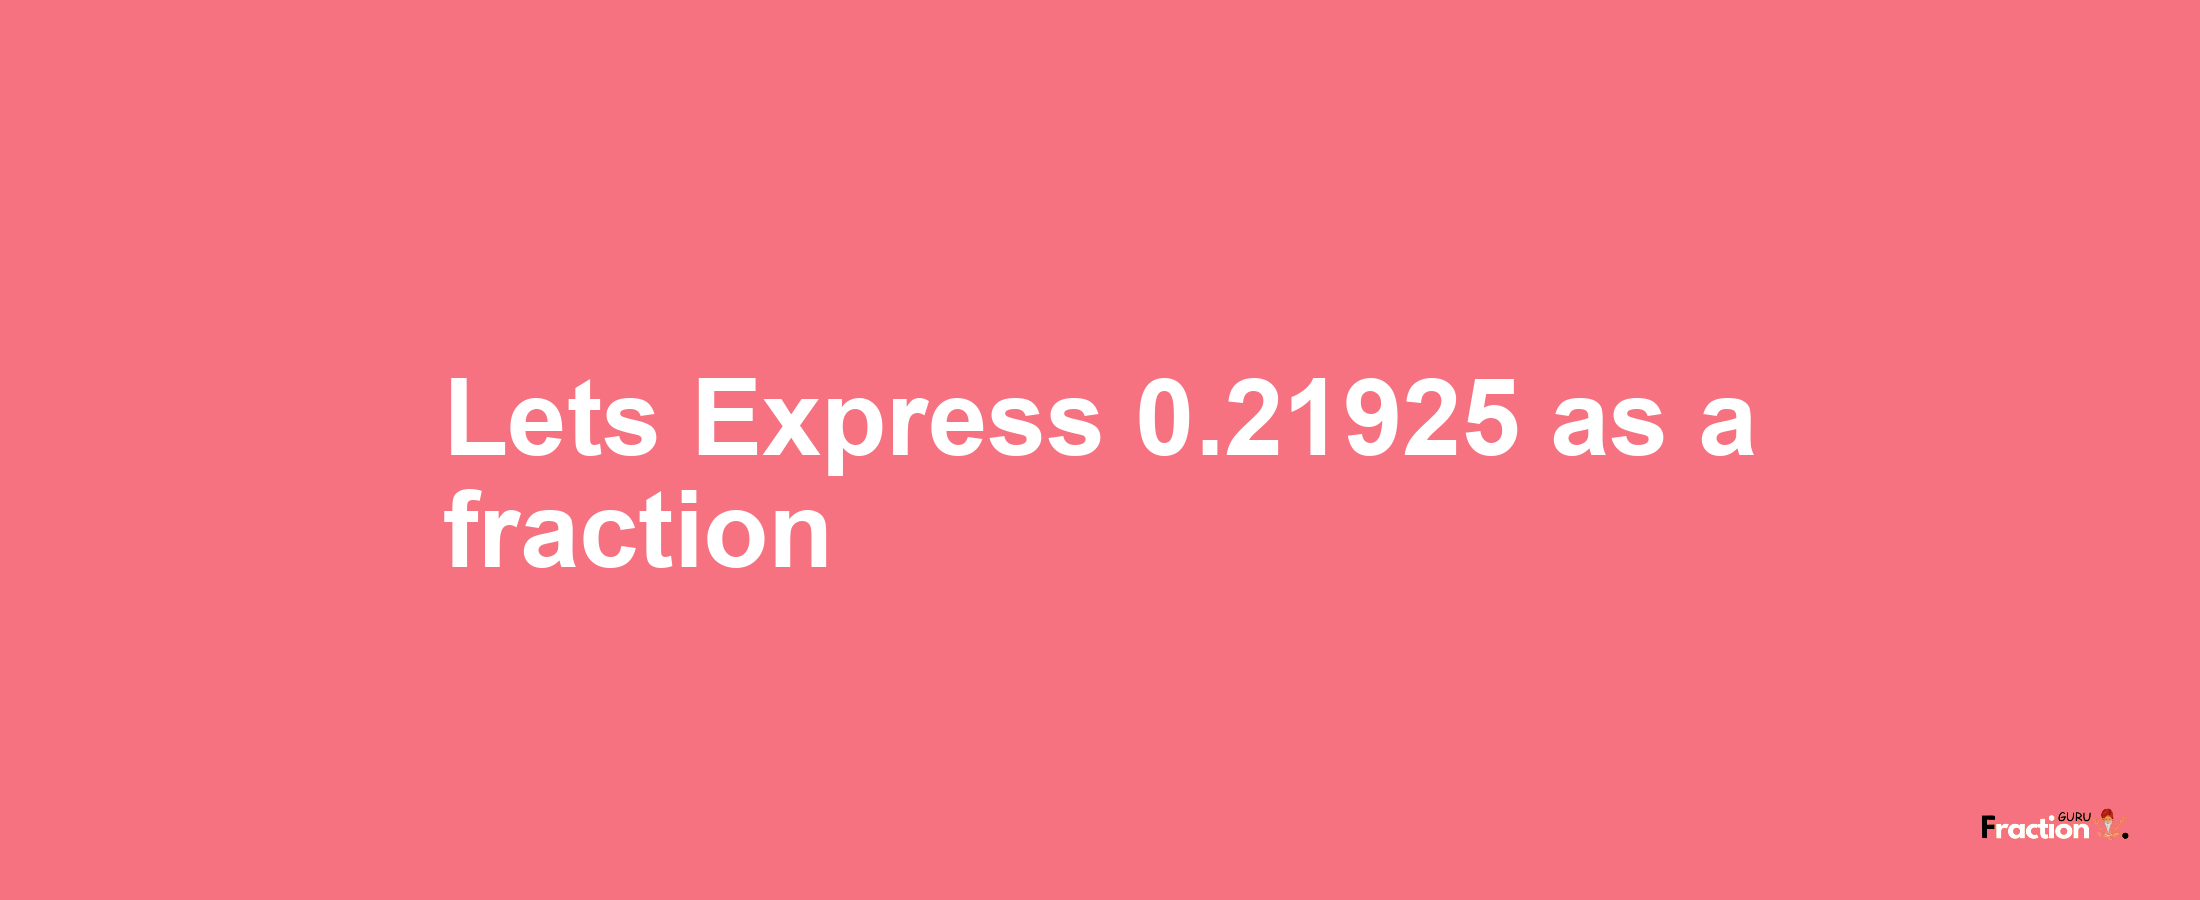 Lets Express 0.21925 as afraction